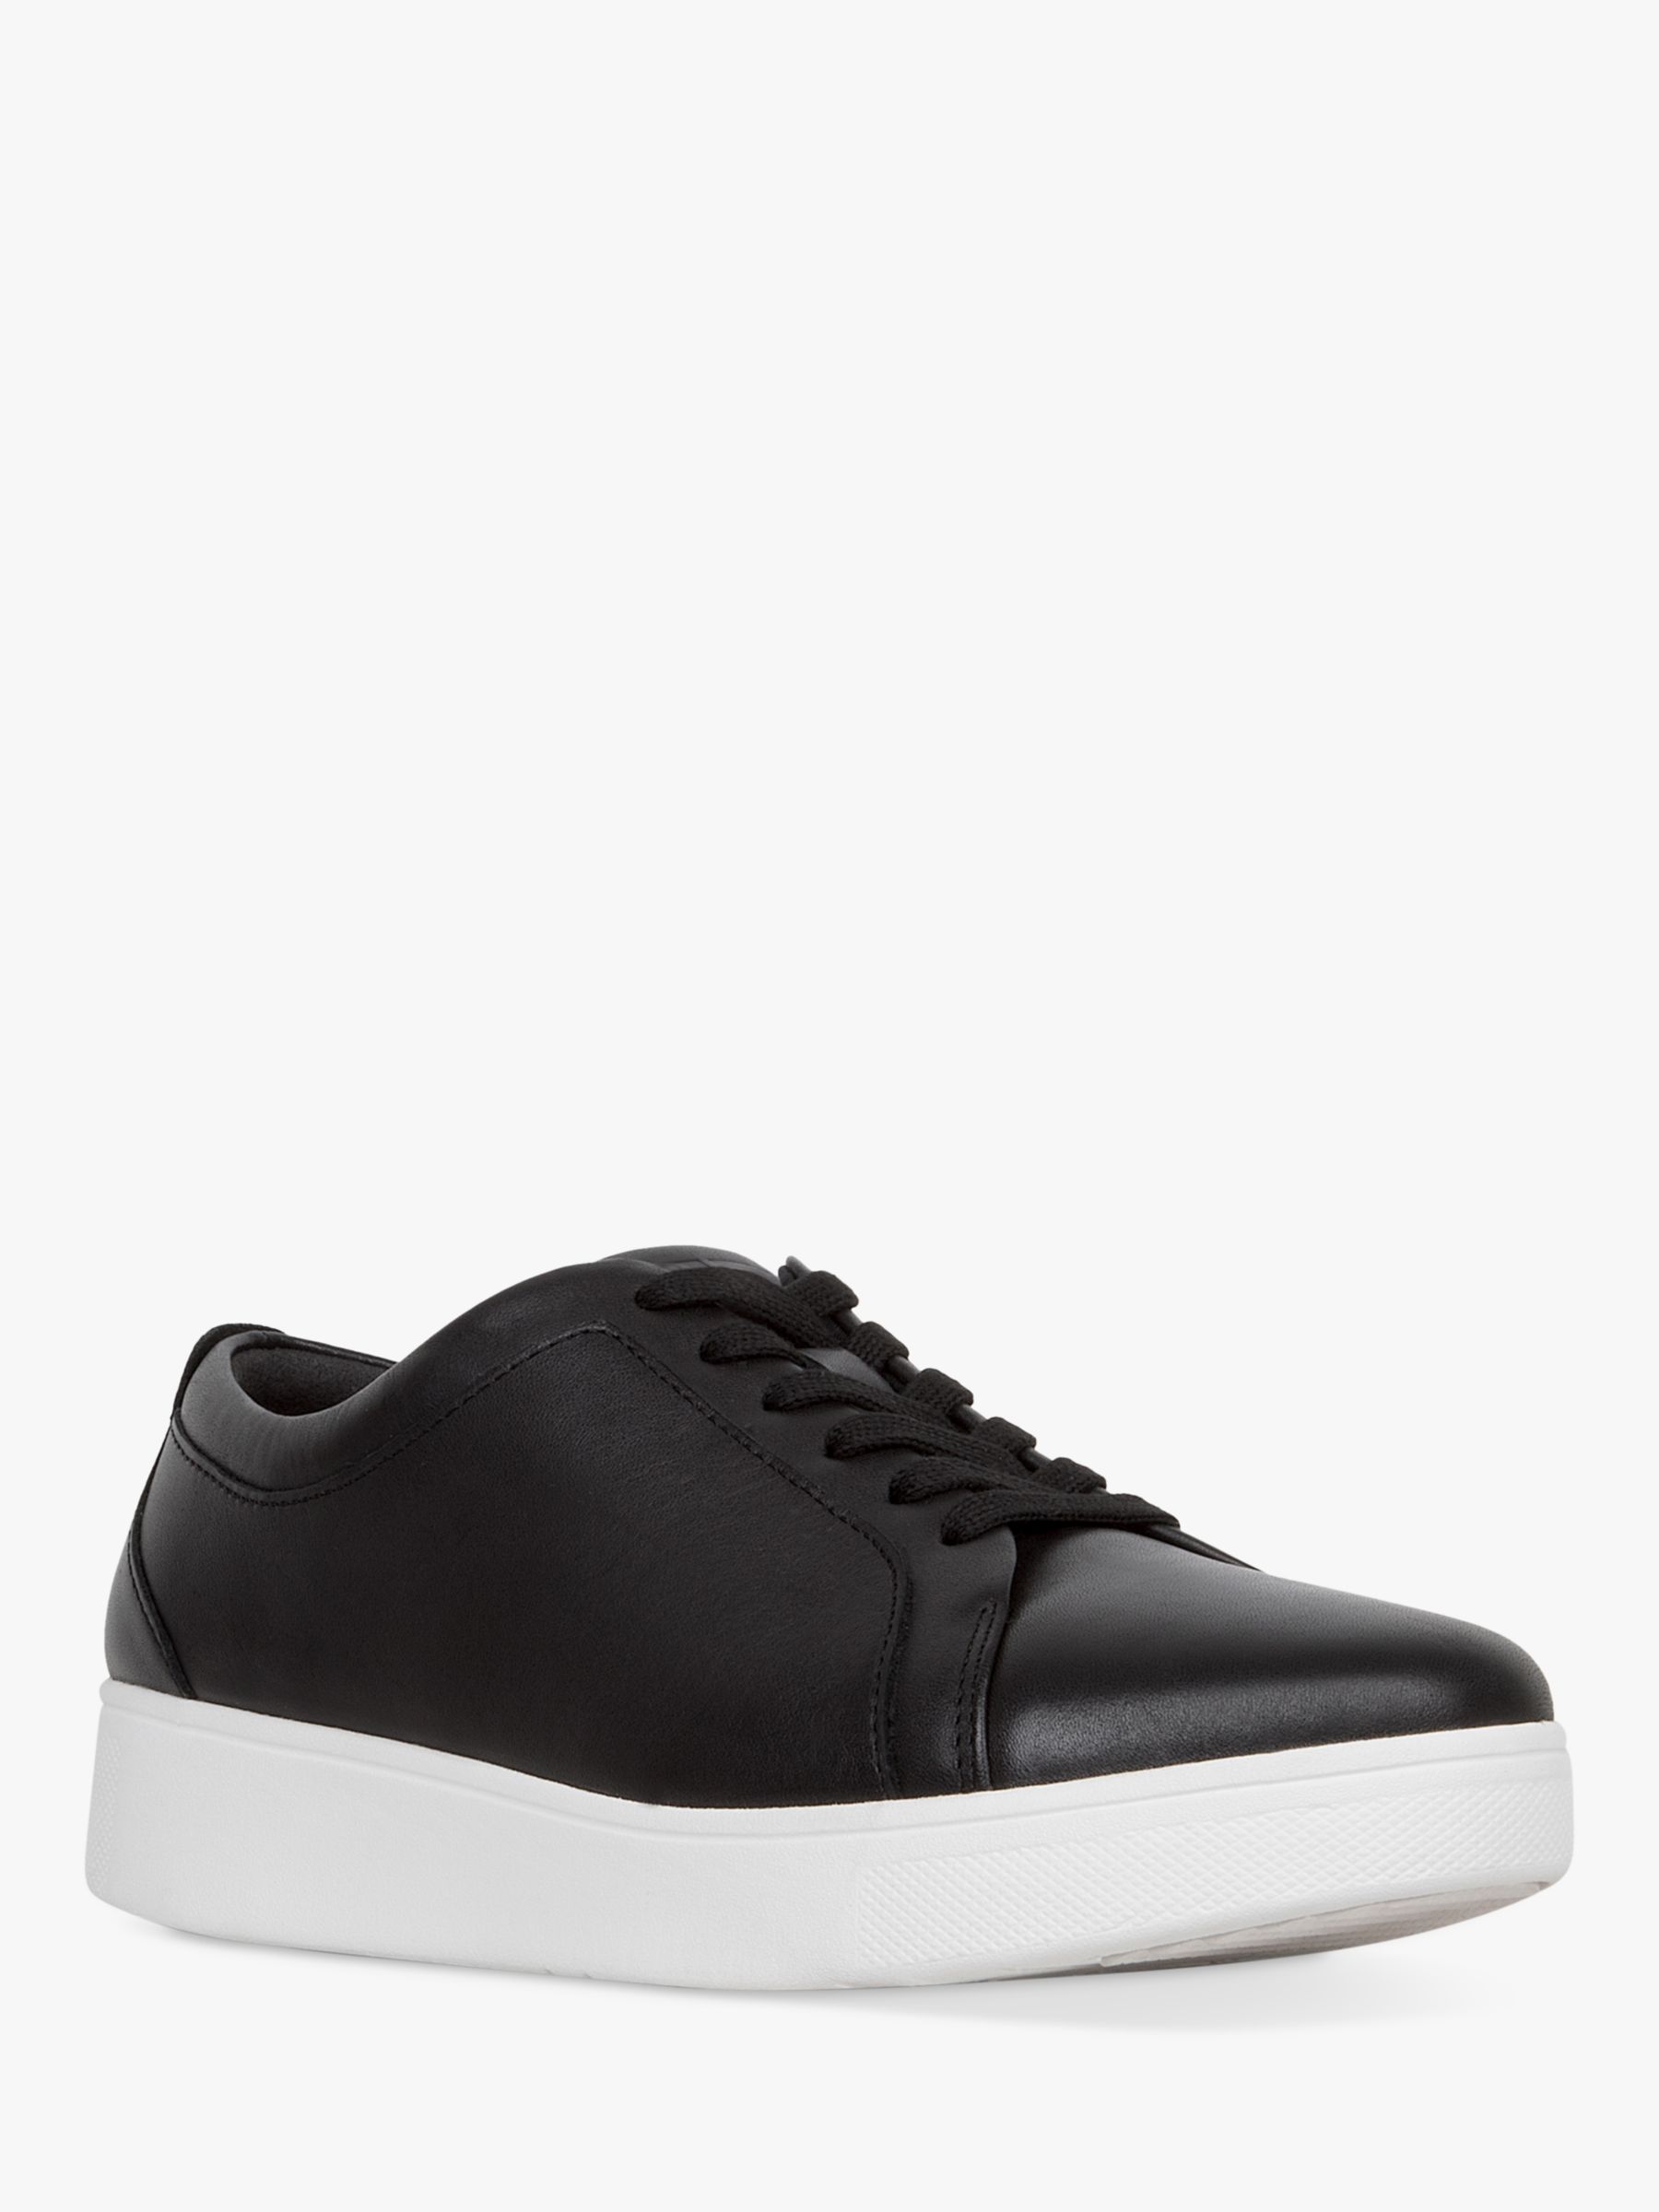 FitFlop Rally Lace Up Leather Trainers, Black/White at John Lewis ...